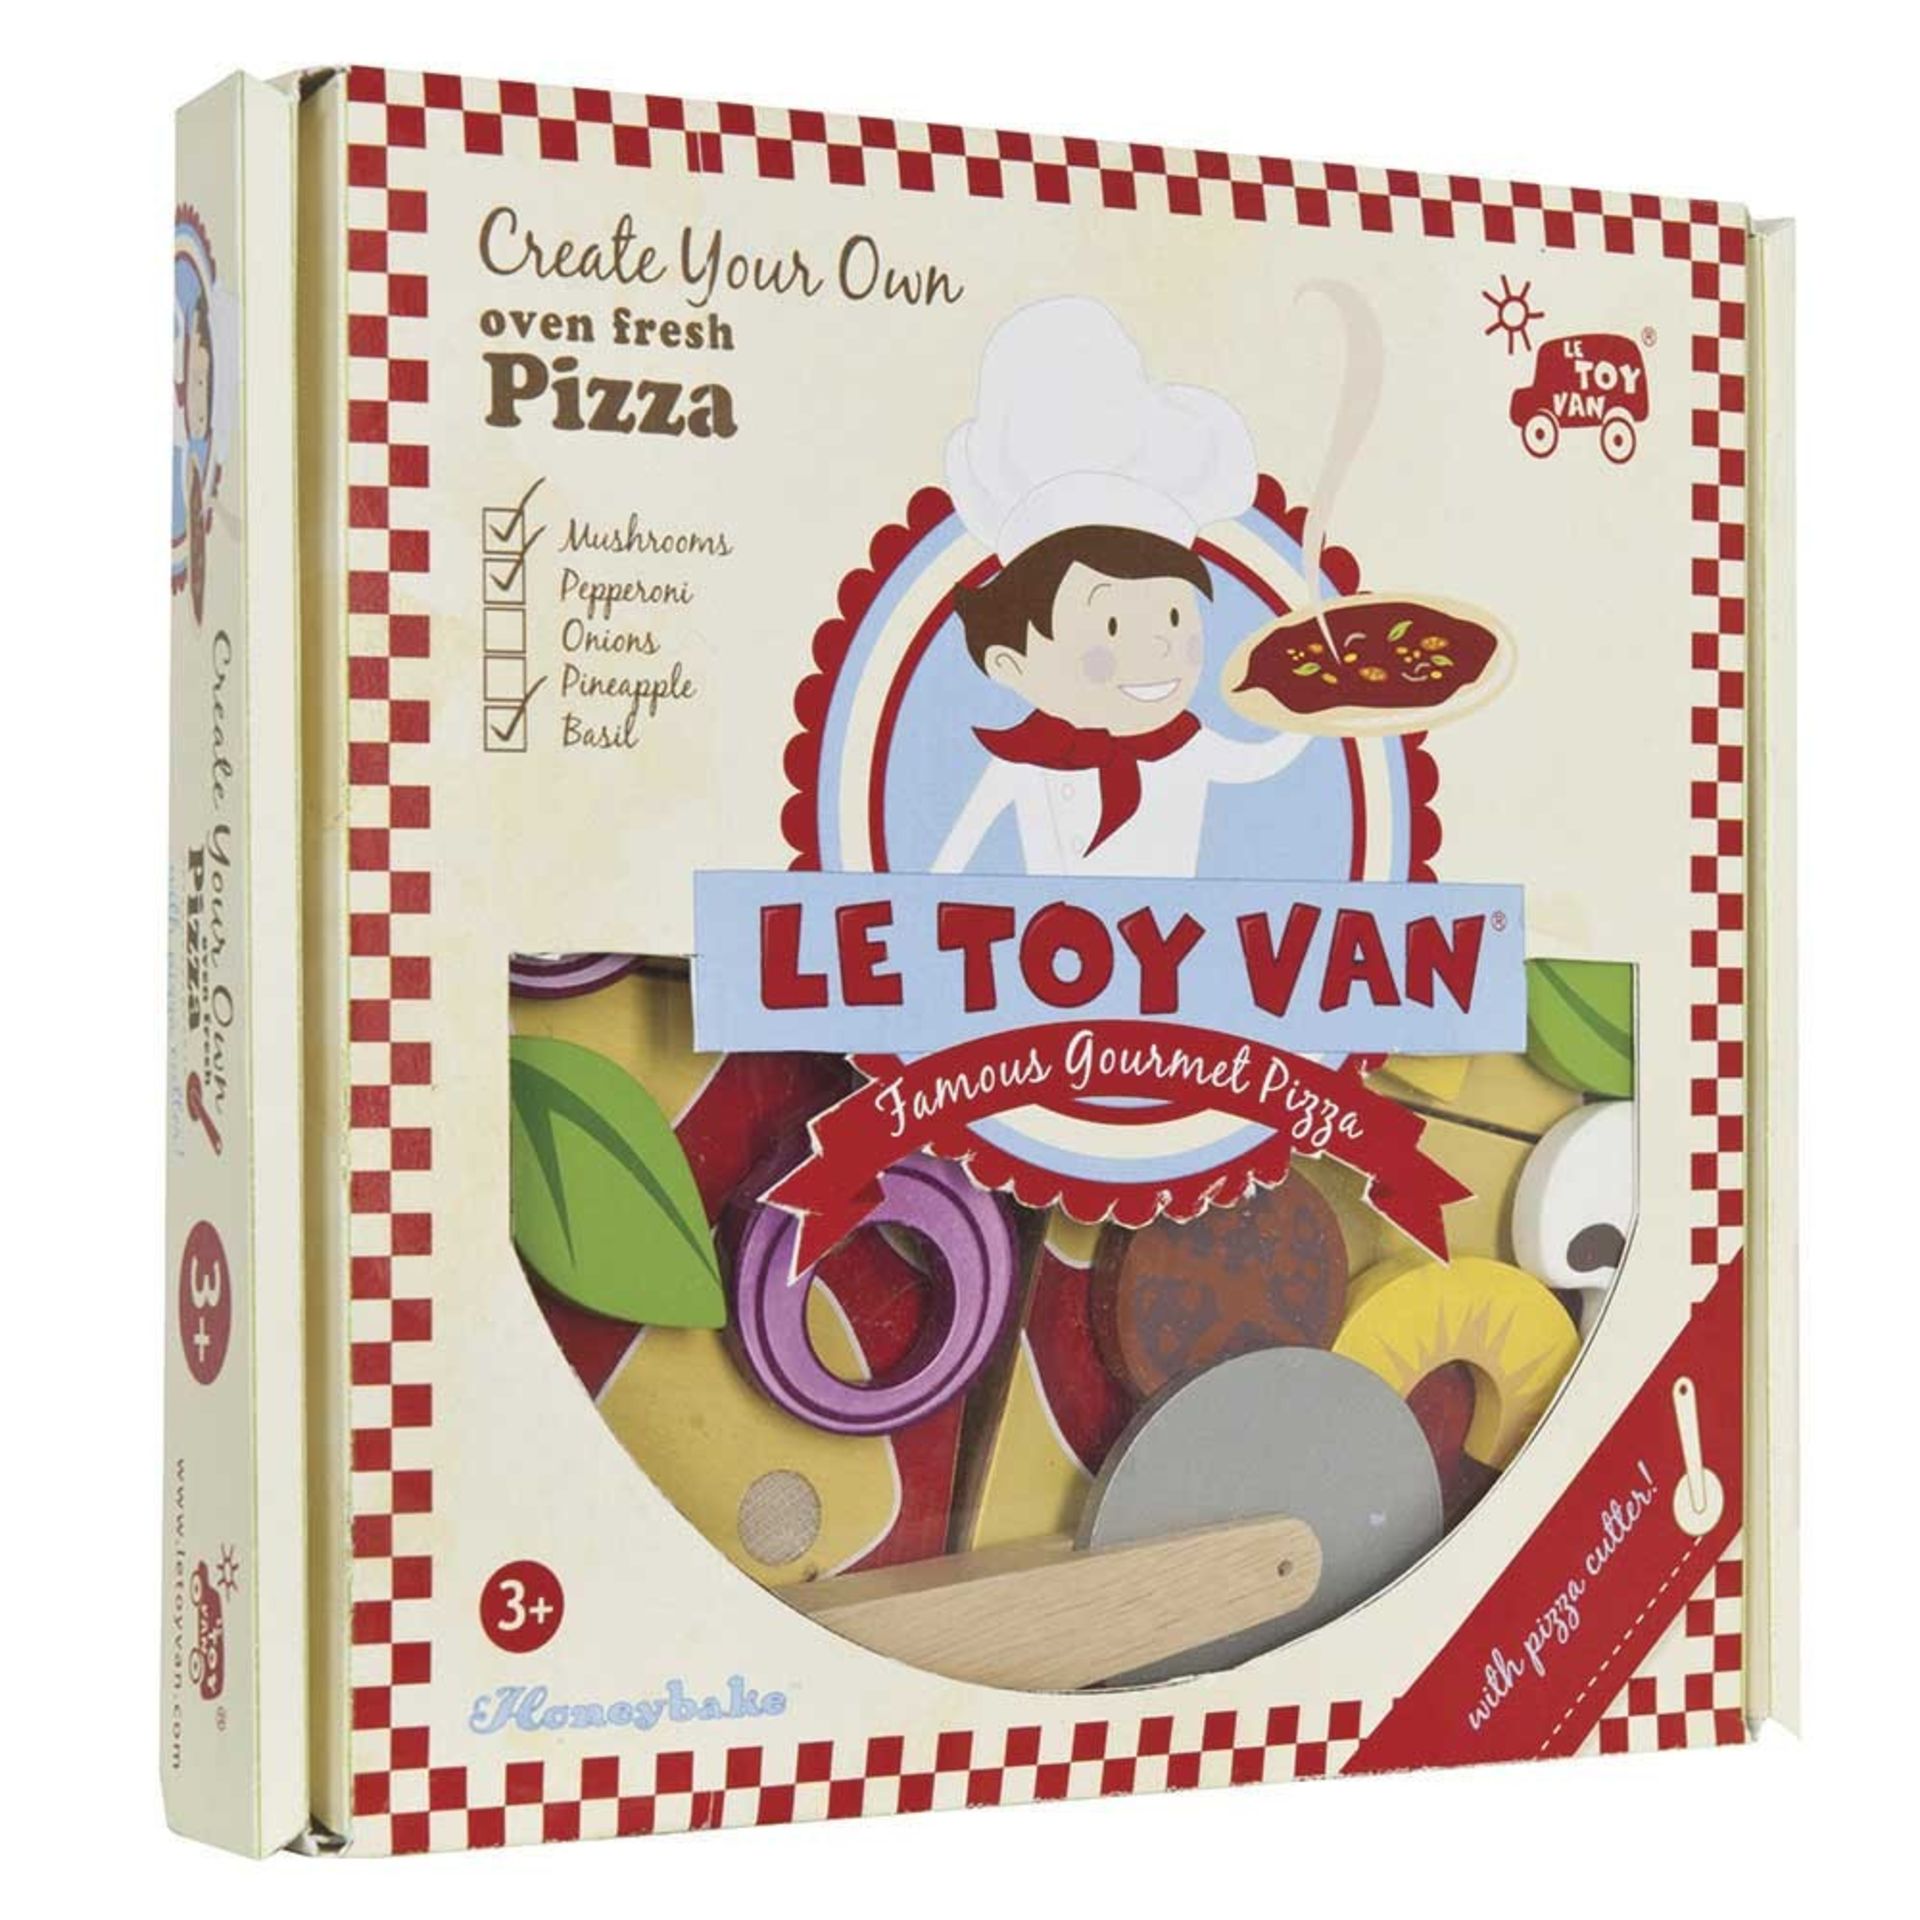 V Brand New A Lot Of Three Wooden Le Toy Van Create Your Own Pizzas ISP £45 (Jojo Maman Bebe) - Image 2 of 2